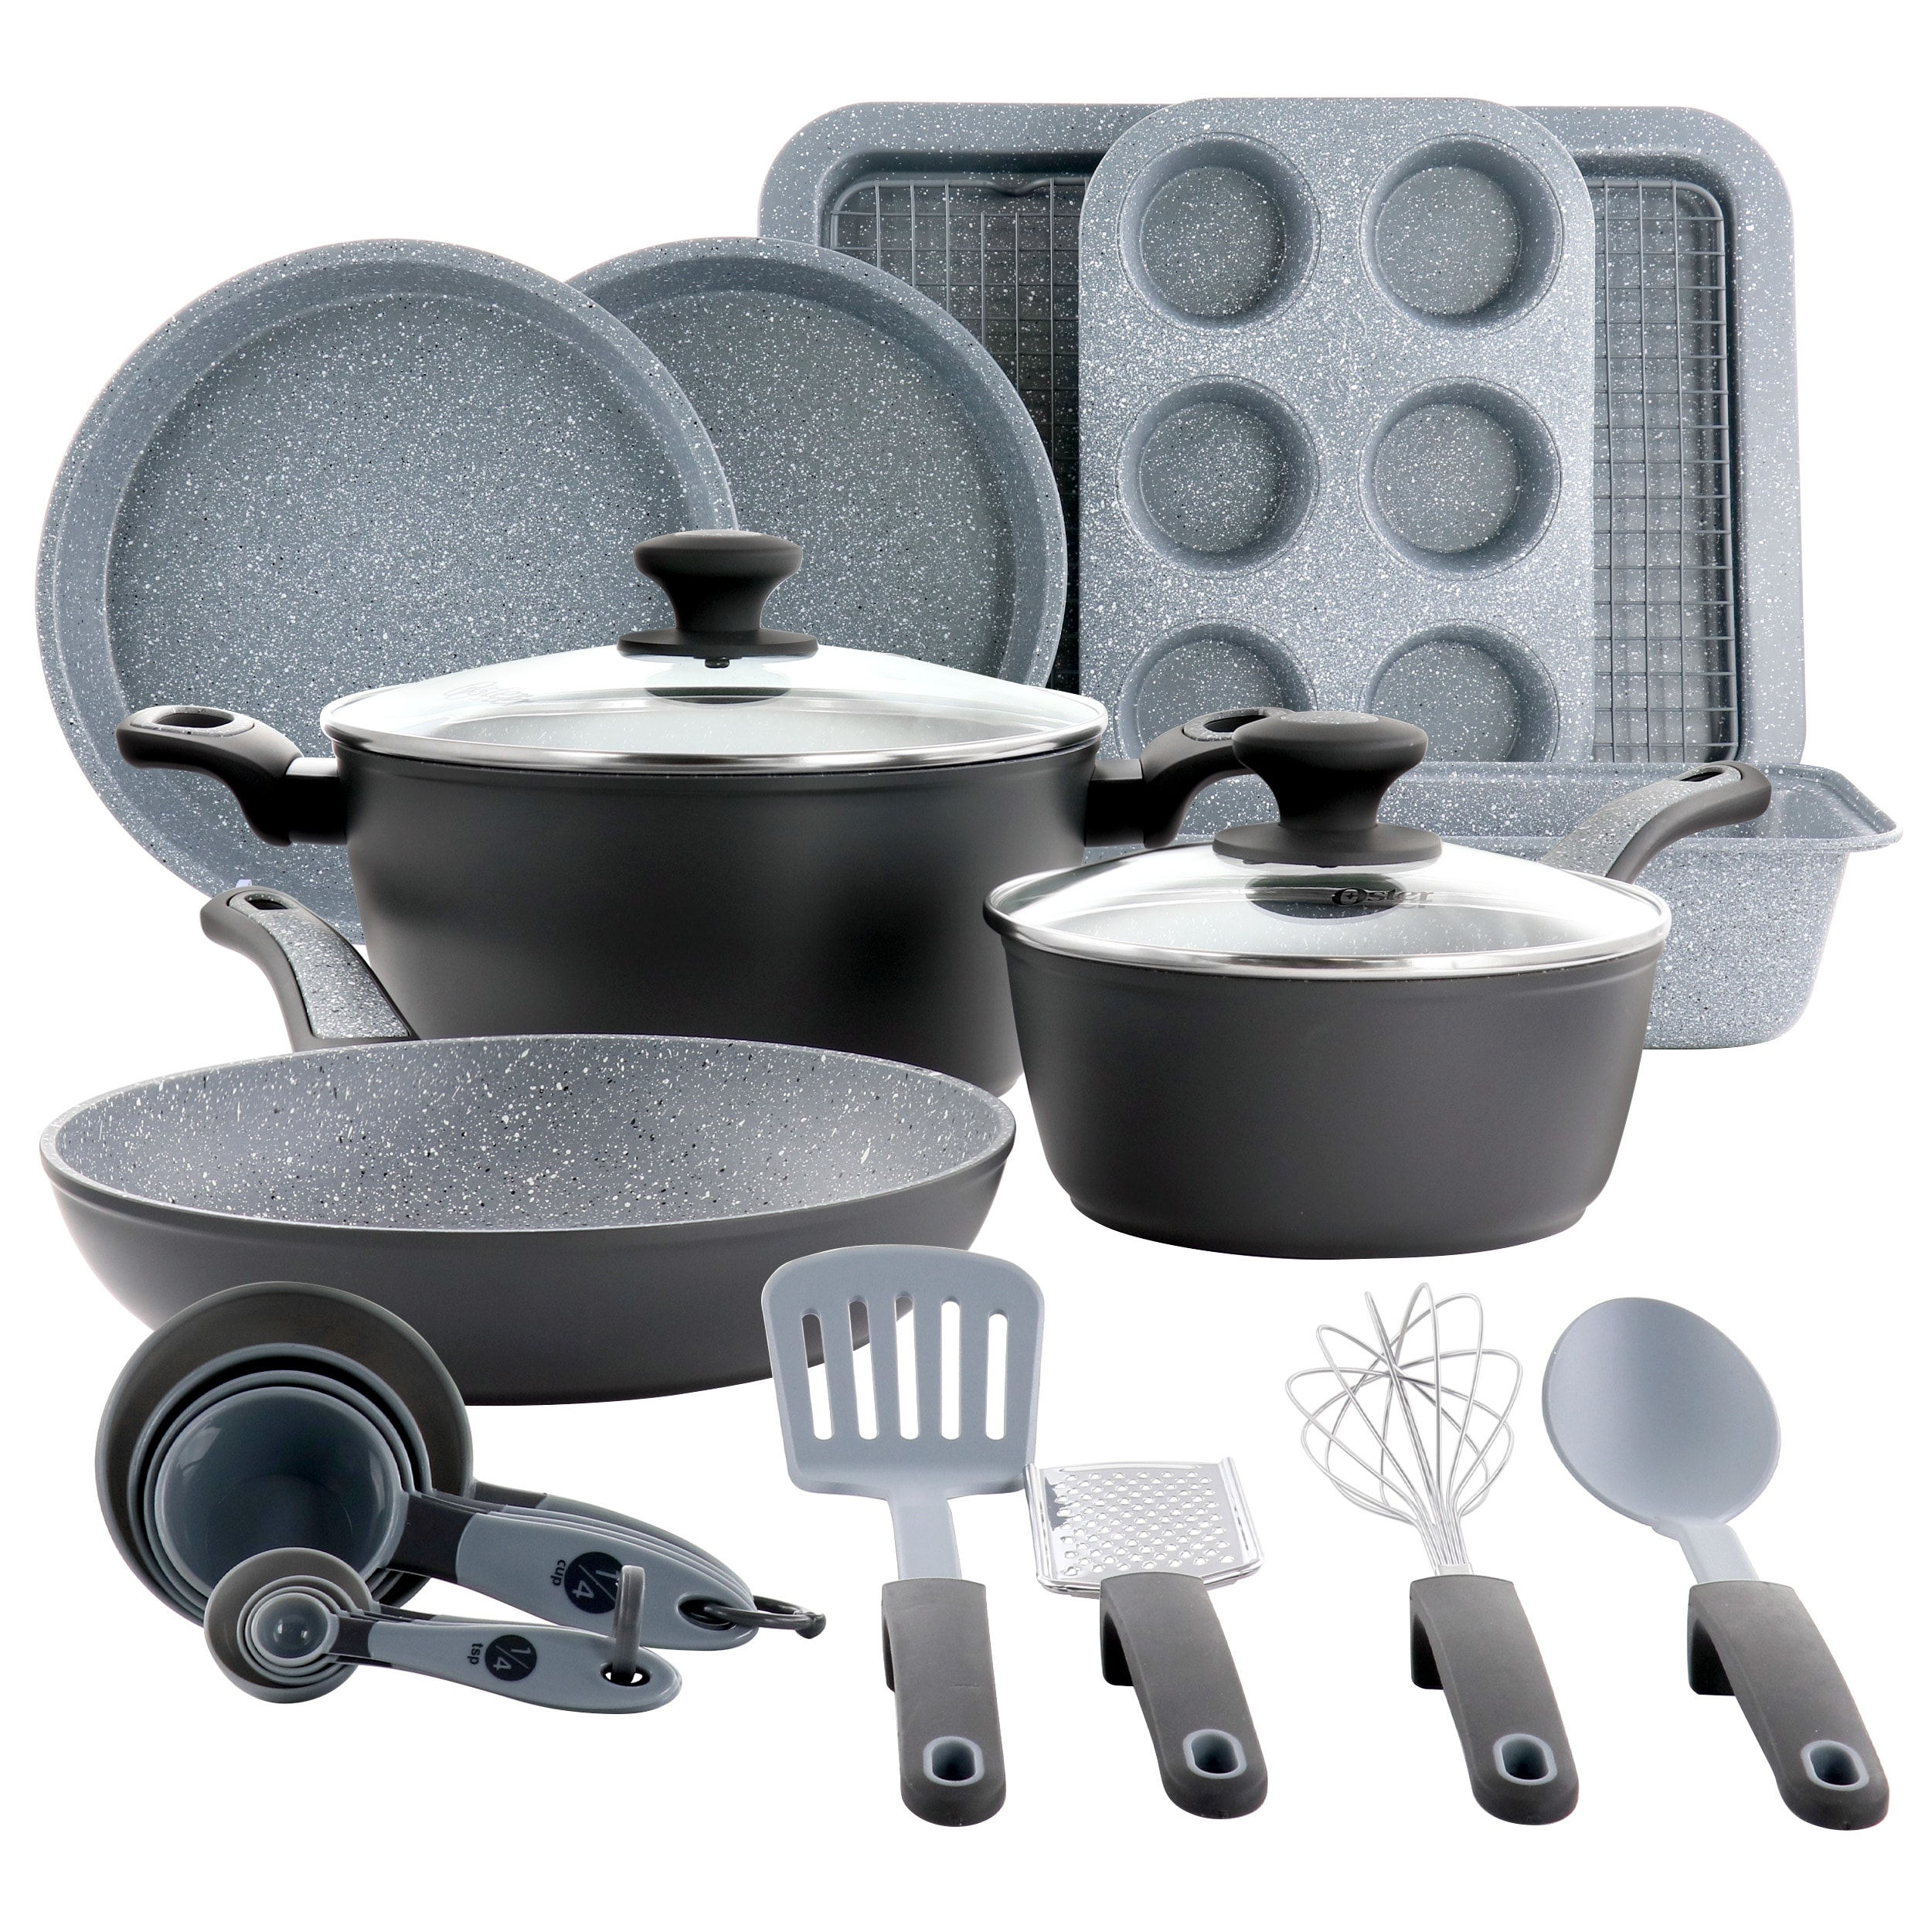 https://ak1.ostkcdn.com/images/products/is/images/direct/33c1017a930438f3b614bb134bc076f2fcfd3121/Oster-Bastone-23-Piece-Nonstick-Cookware-Bakeware-Set-in-Speckled-Gray.jpg